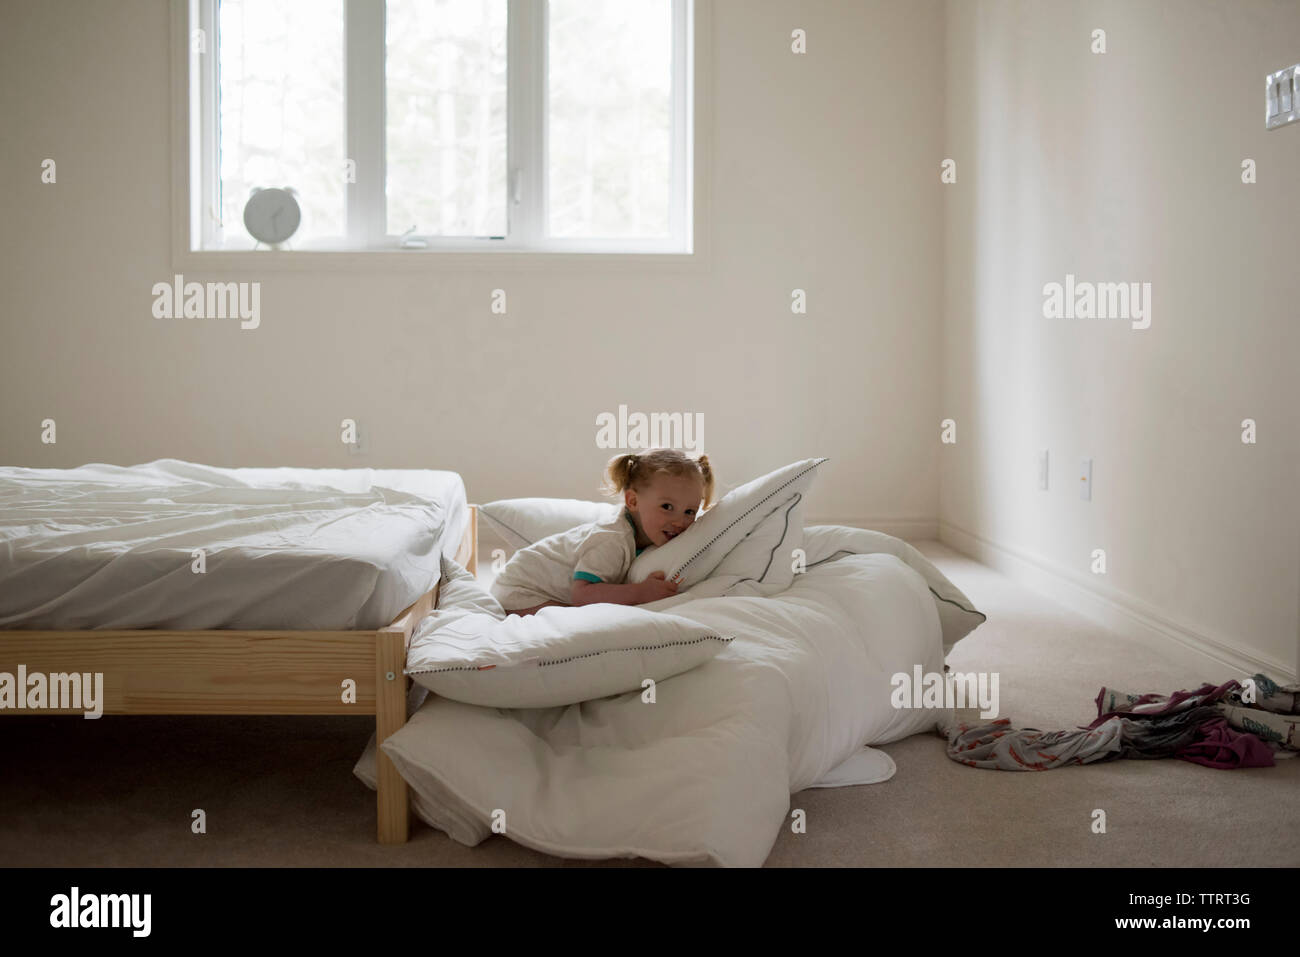 Portrait of girl sitting on duvet by bed in bedroom Stock Photo